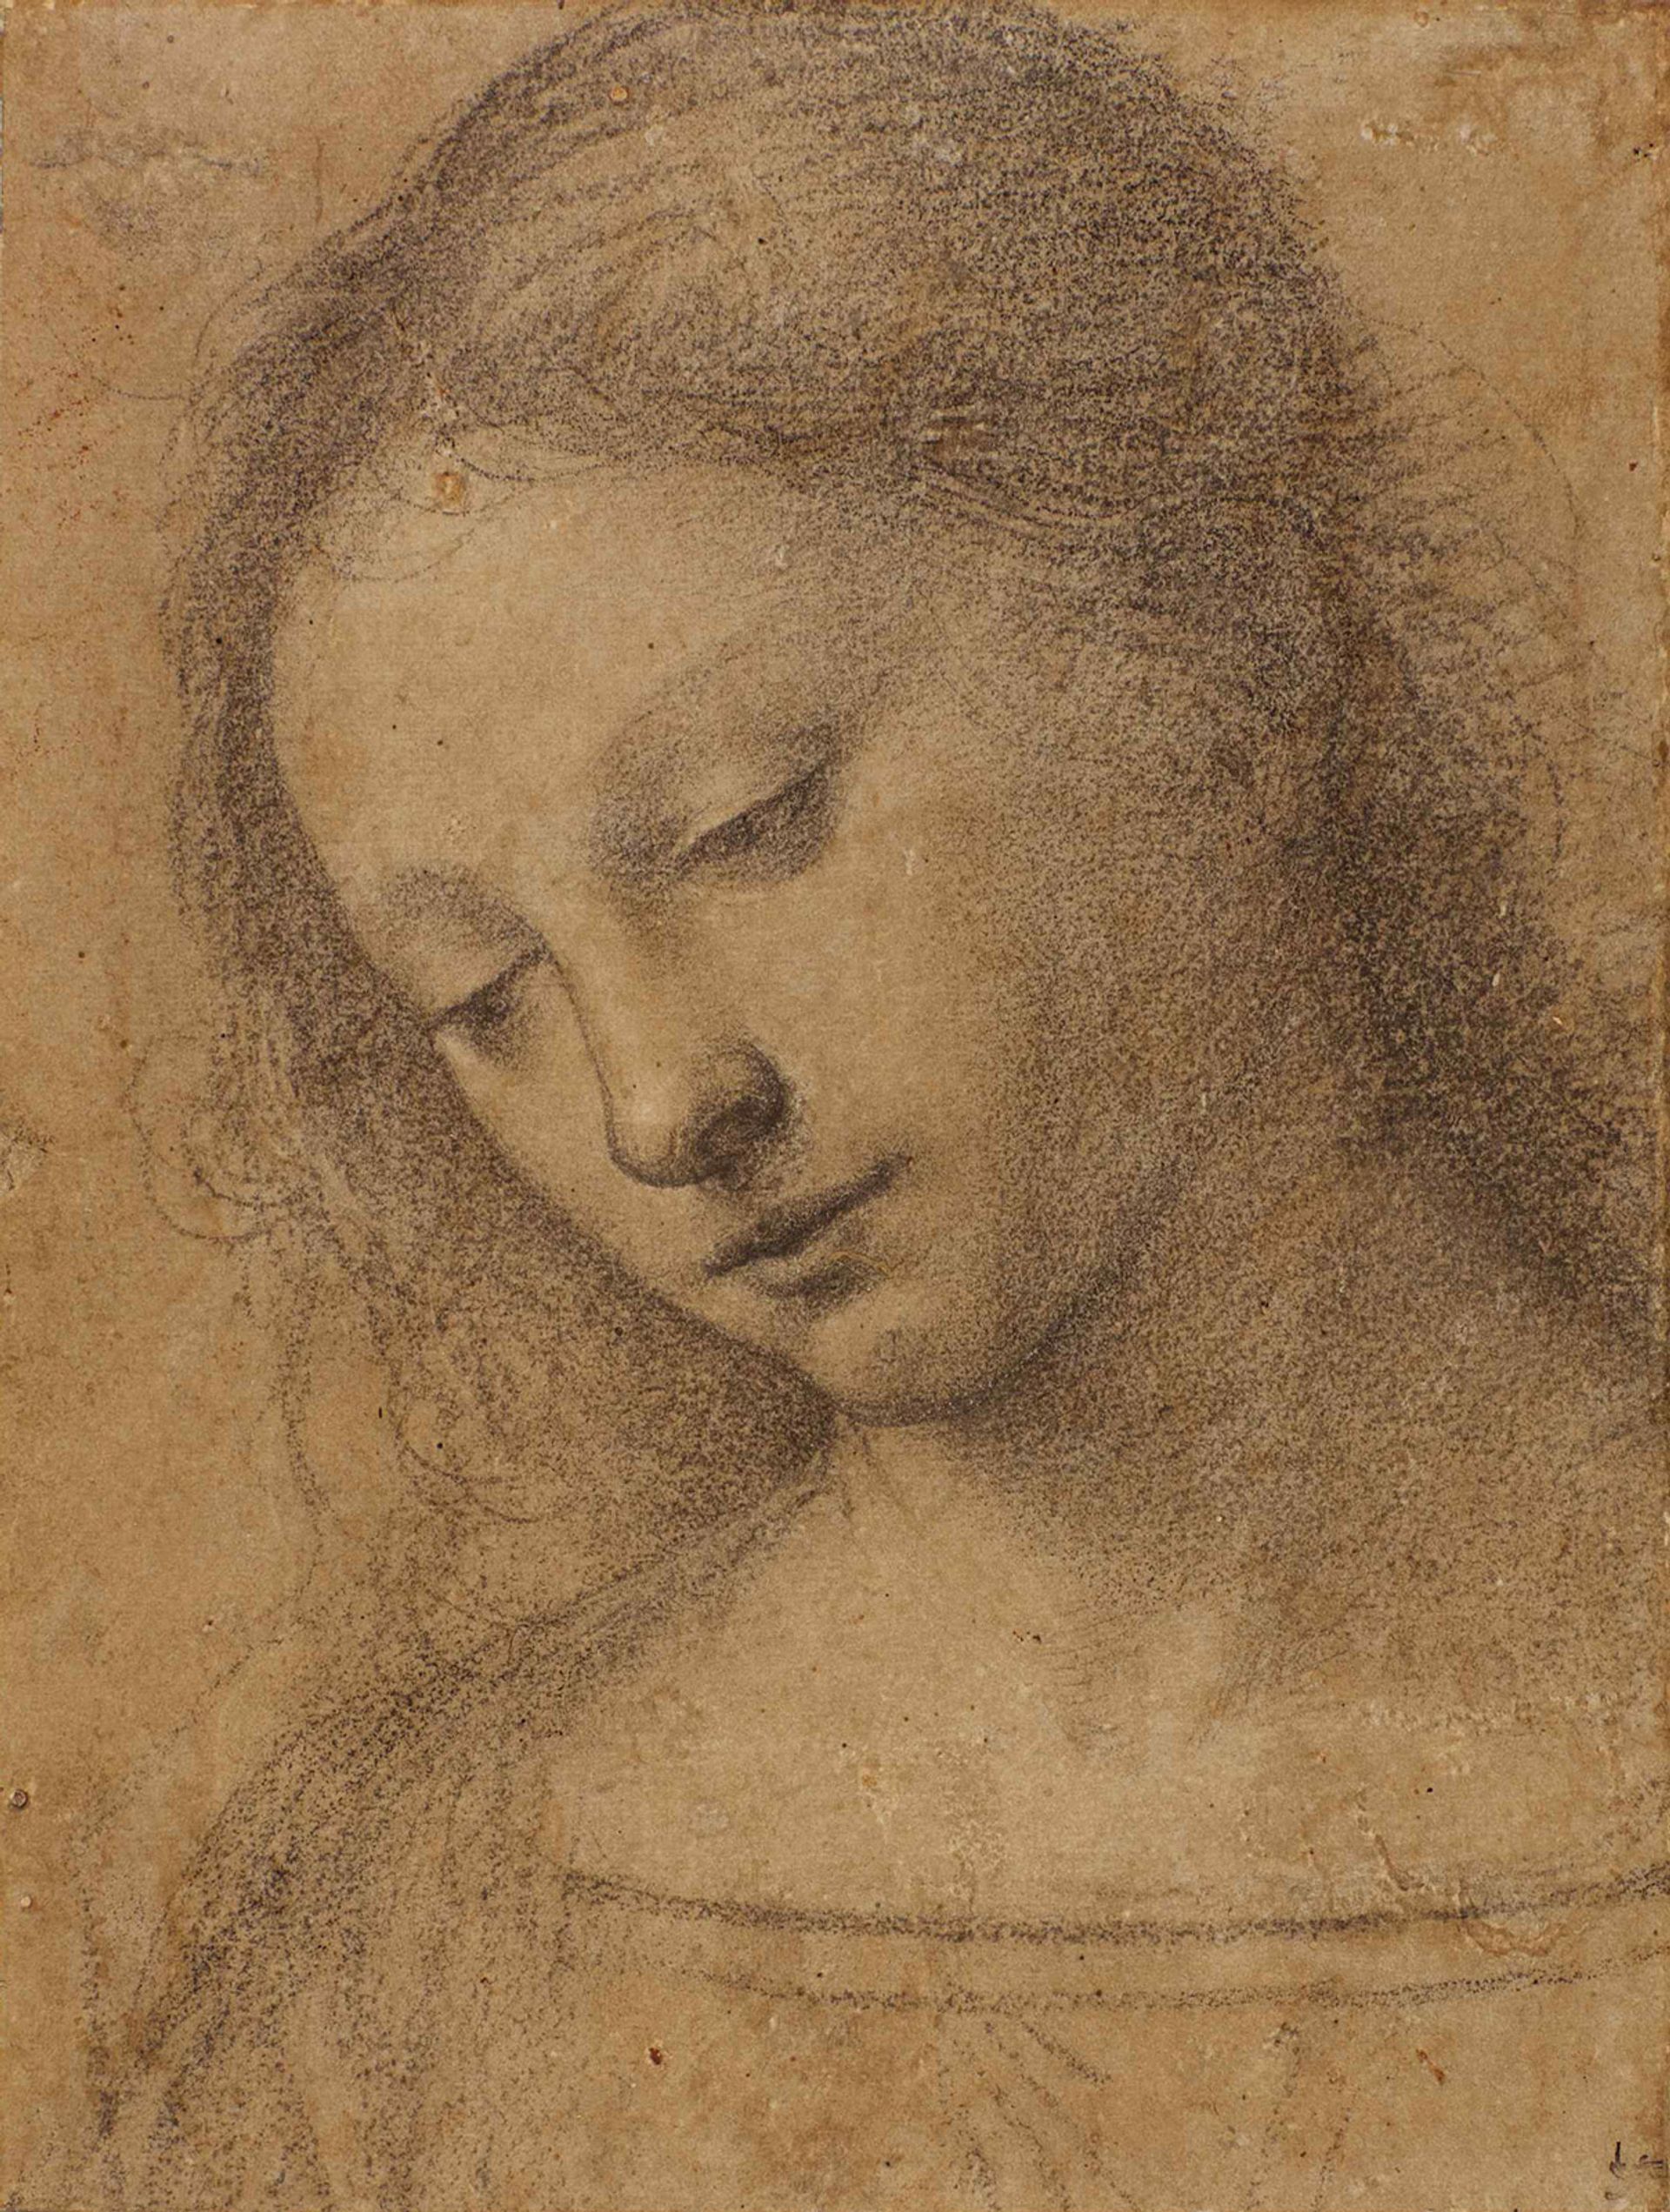 Fra Bartolommeo, Head of a Young Woman, Looking Down to the Left (1490s) Courtesy of Sotheby’s